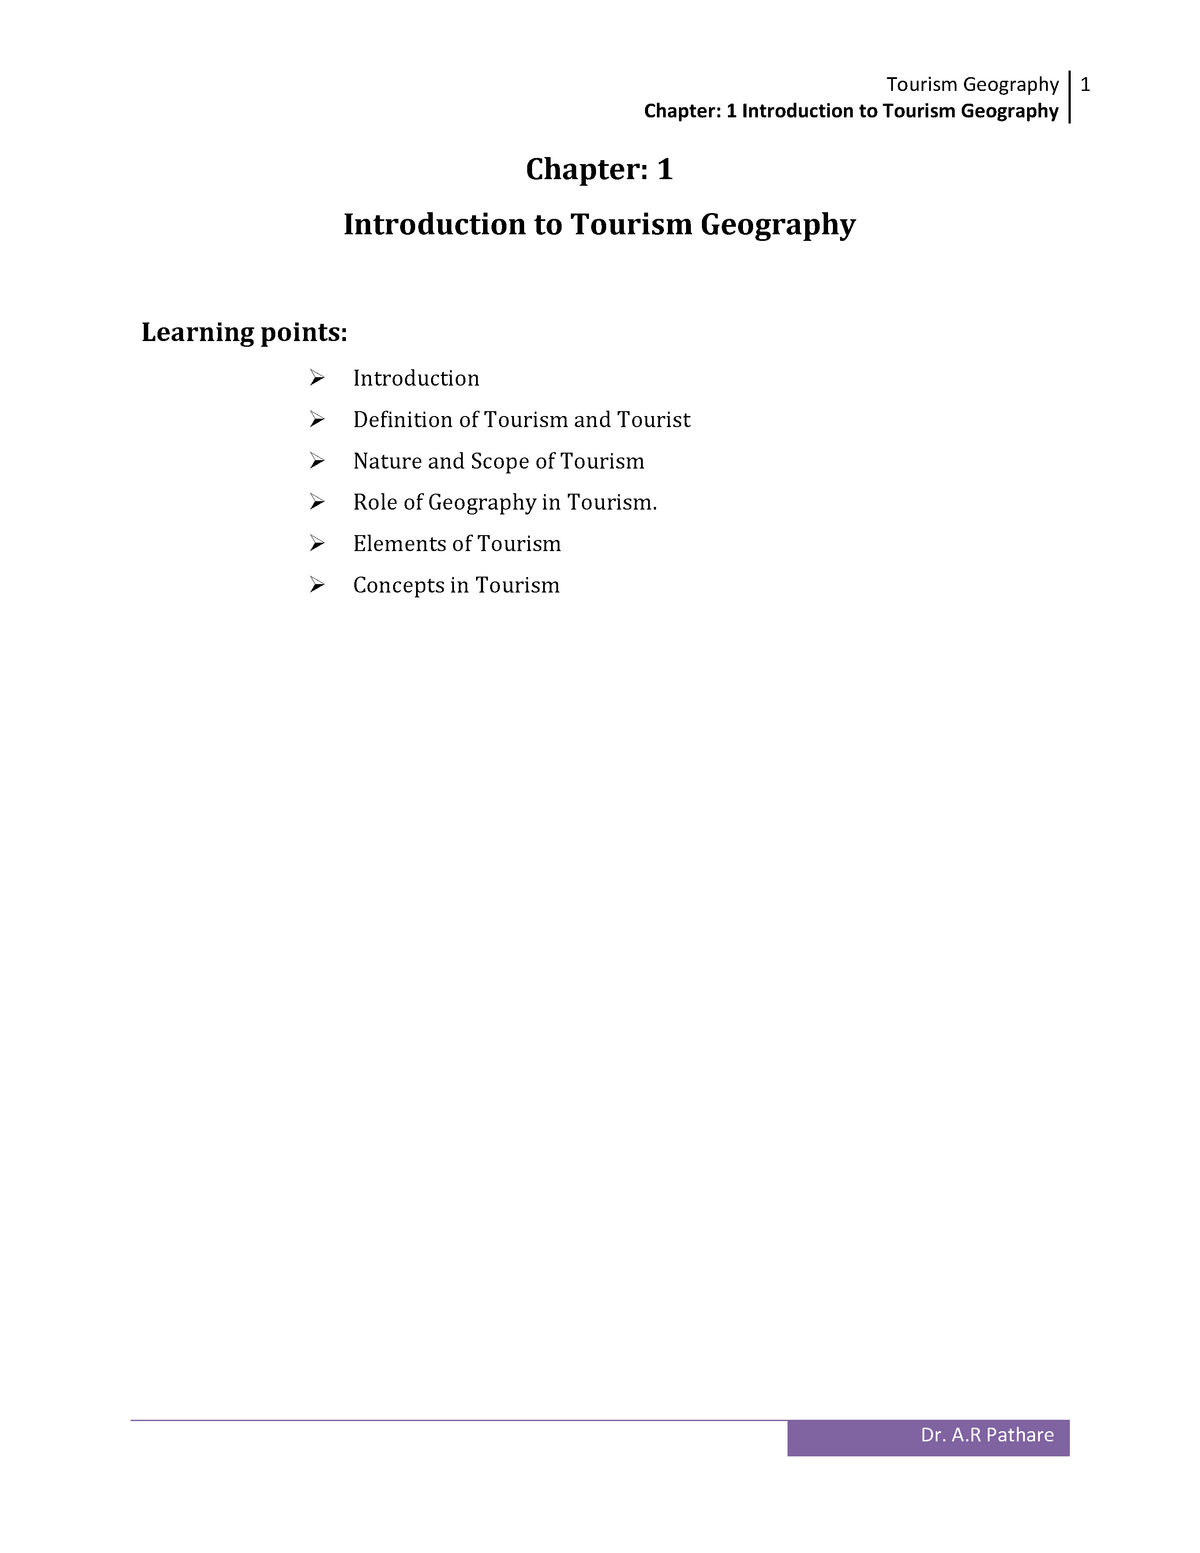 tourism geography essay